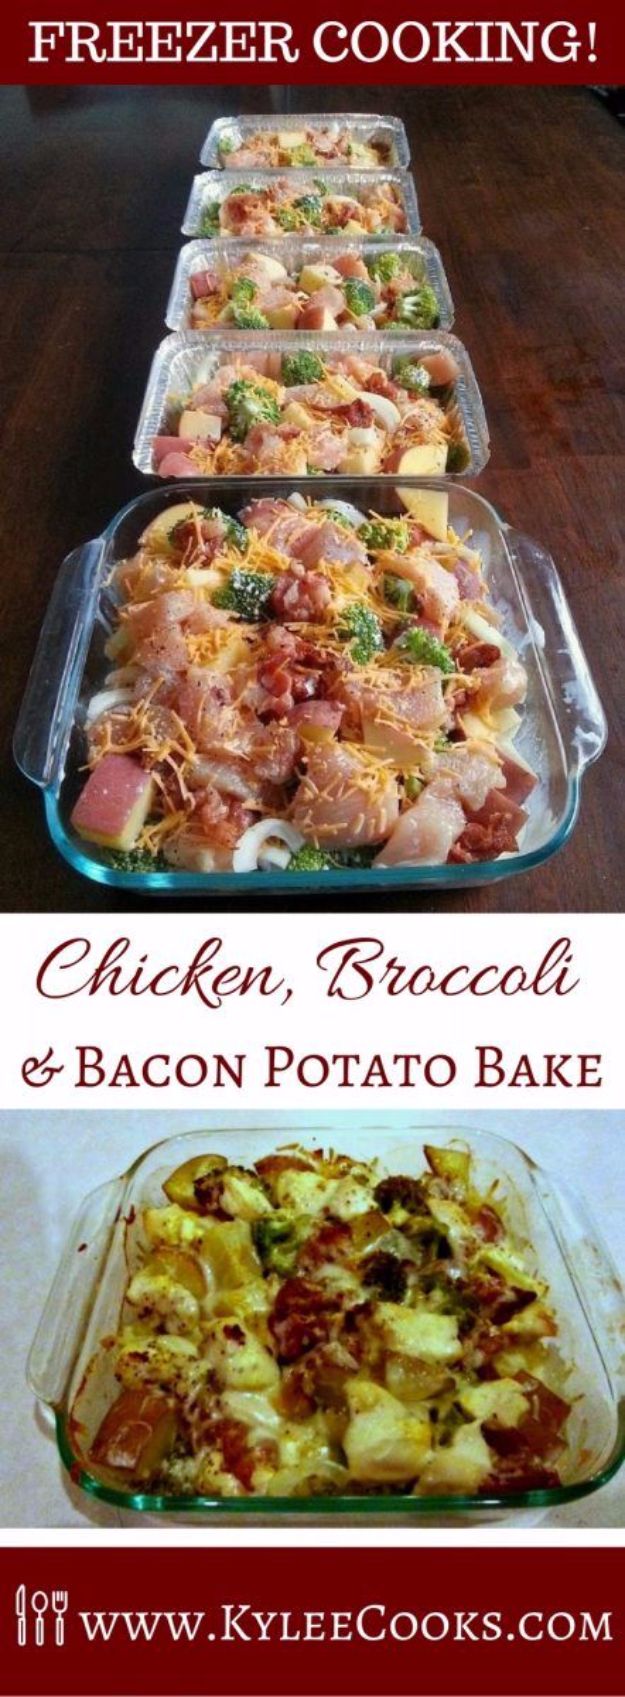 Healthy Crockpot Recipes to Make and Freeze Ahead - Chicken, Broccoli, Bacon & Potato Bake - Easy and Quick Dinners, Soups, Sides You Make Put In The Freezer for Simple Last Minute Cooking - Low Fat Chicken, beef stew recipe